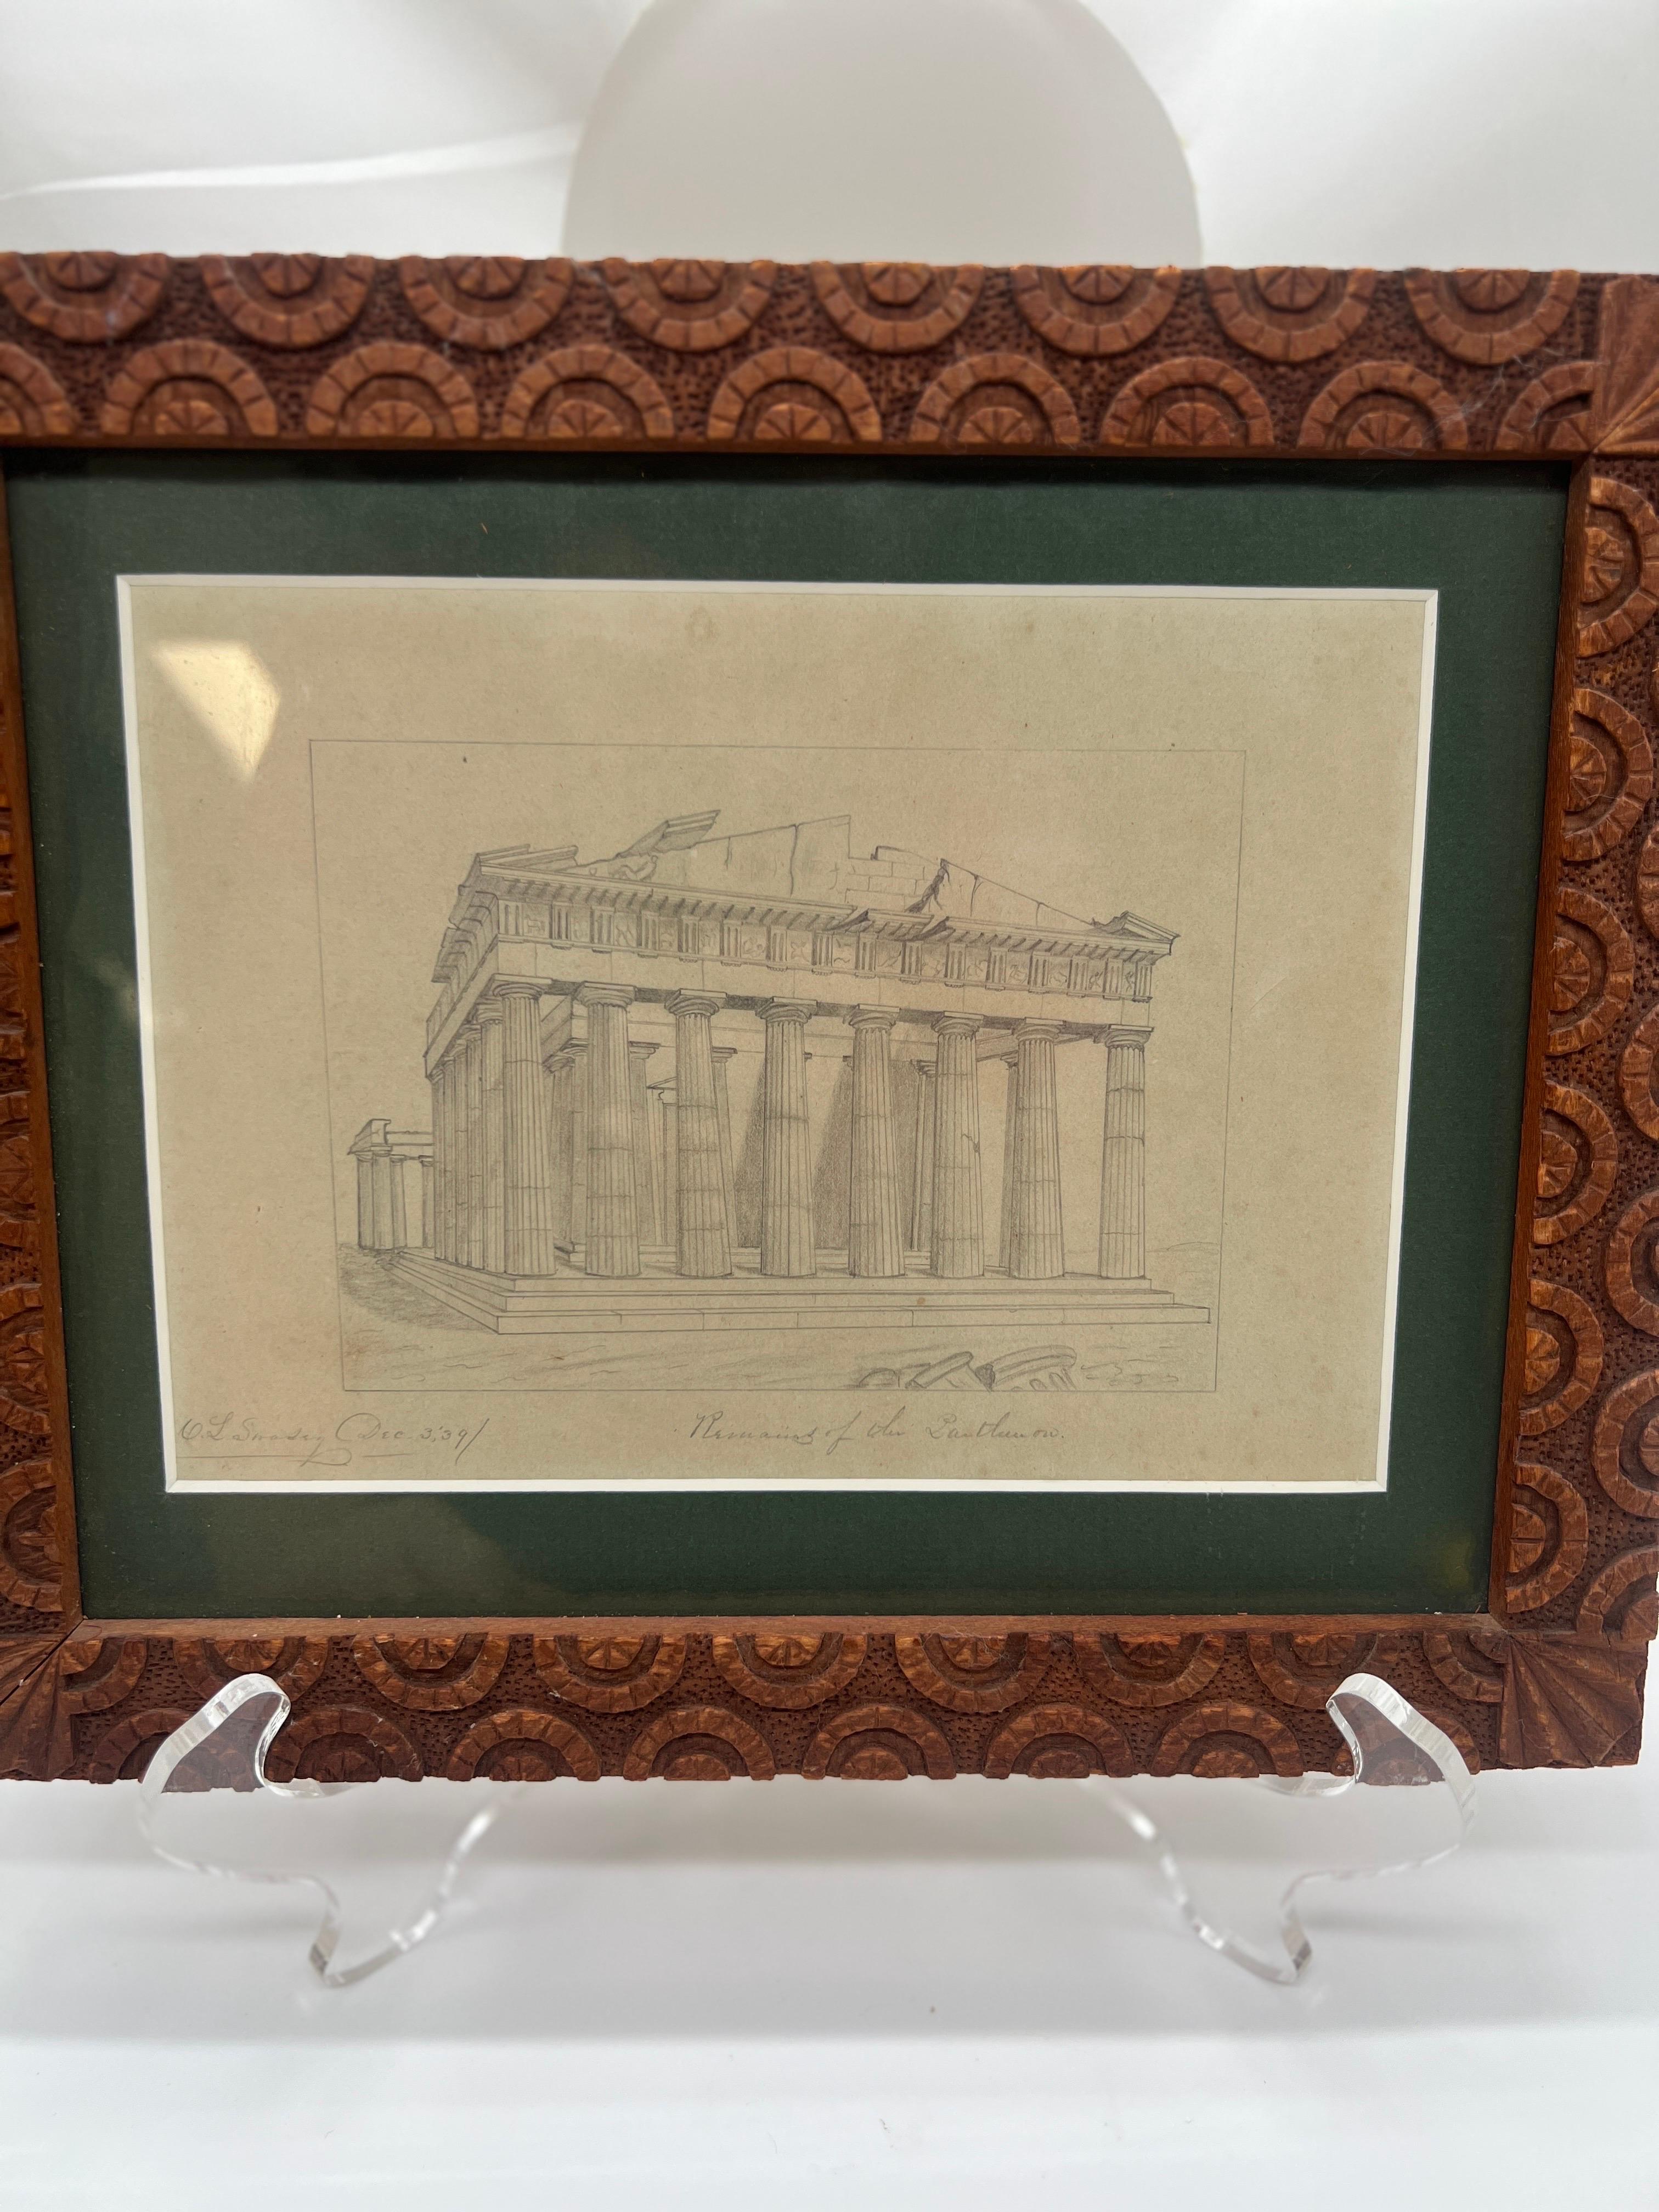 Charles Lamson Swasey (American New Bedford Massachusetts, 1815-1888). 

This wonderful grand tour graphite on paper drawing was done in December 1839 and depicts the remains of the Great Parthenon in Greece. 

This piece is housed in a well carved